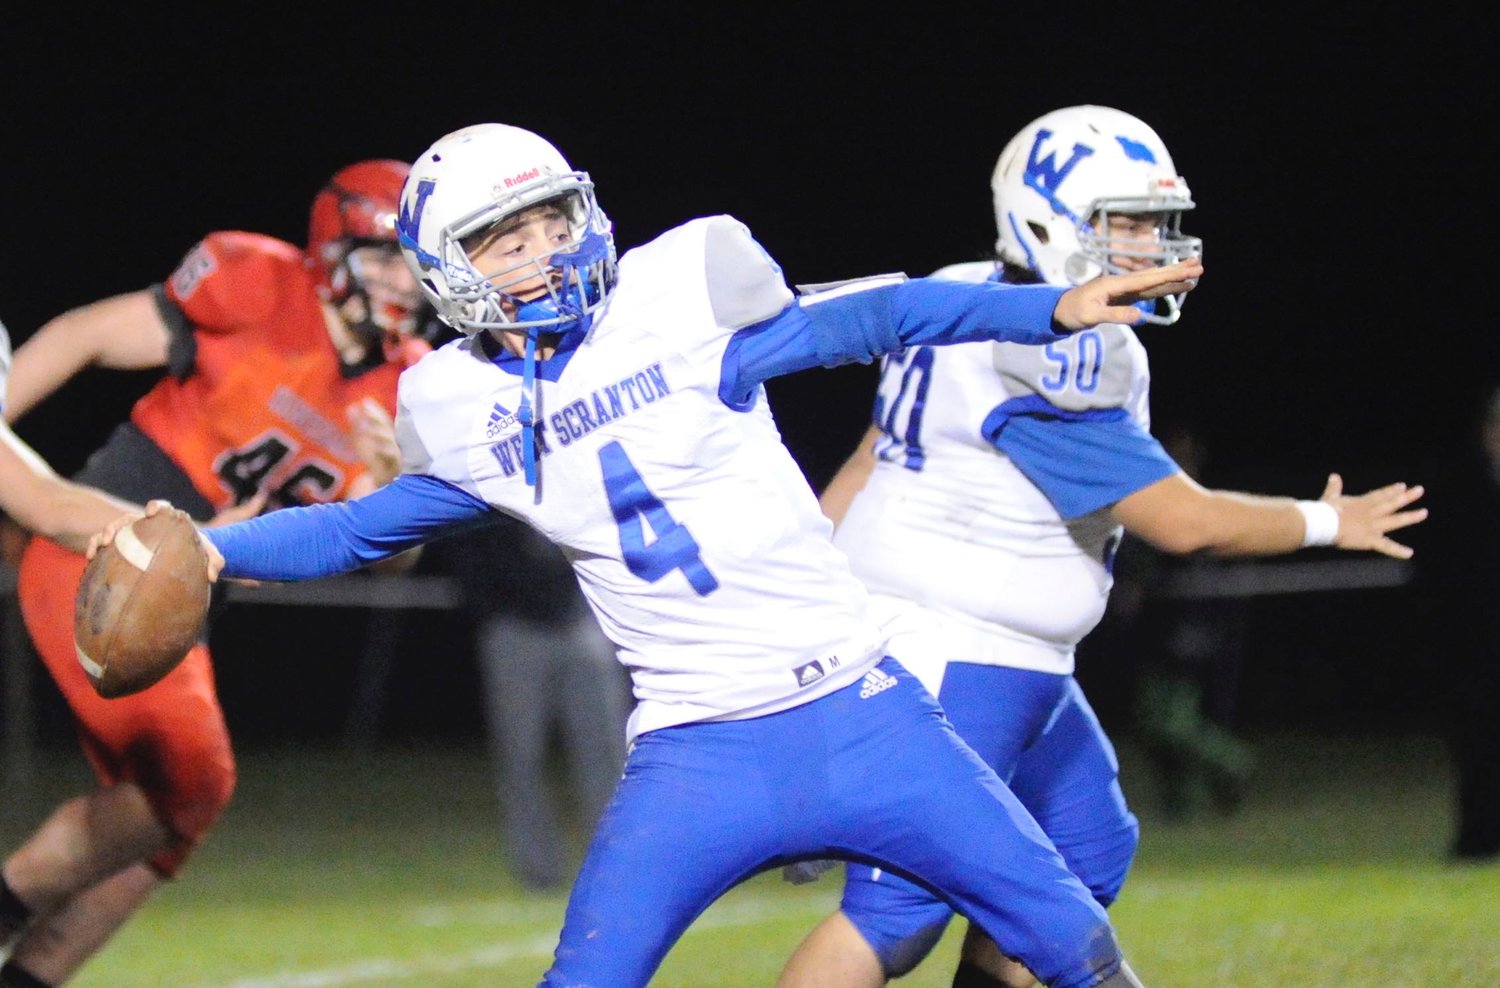 Going for broke. West Scranton’s QB Dan Van Dusky tries a “Hail Mary” late in the game. In a last-minute drive, the Invaders almost scored deep in Hornets territory, but failed to put points on the board...